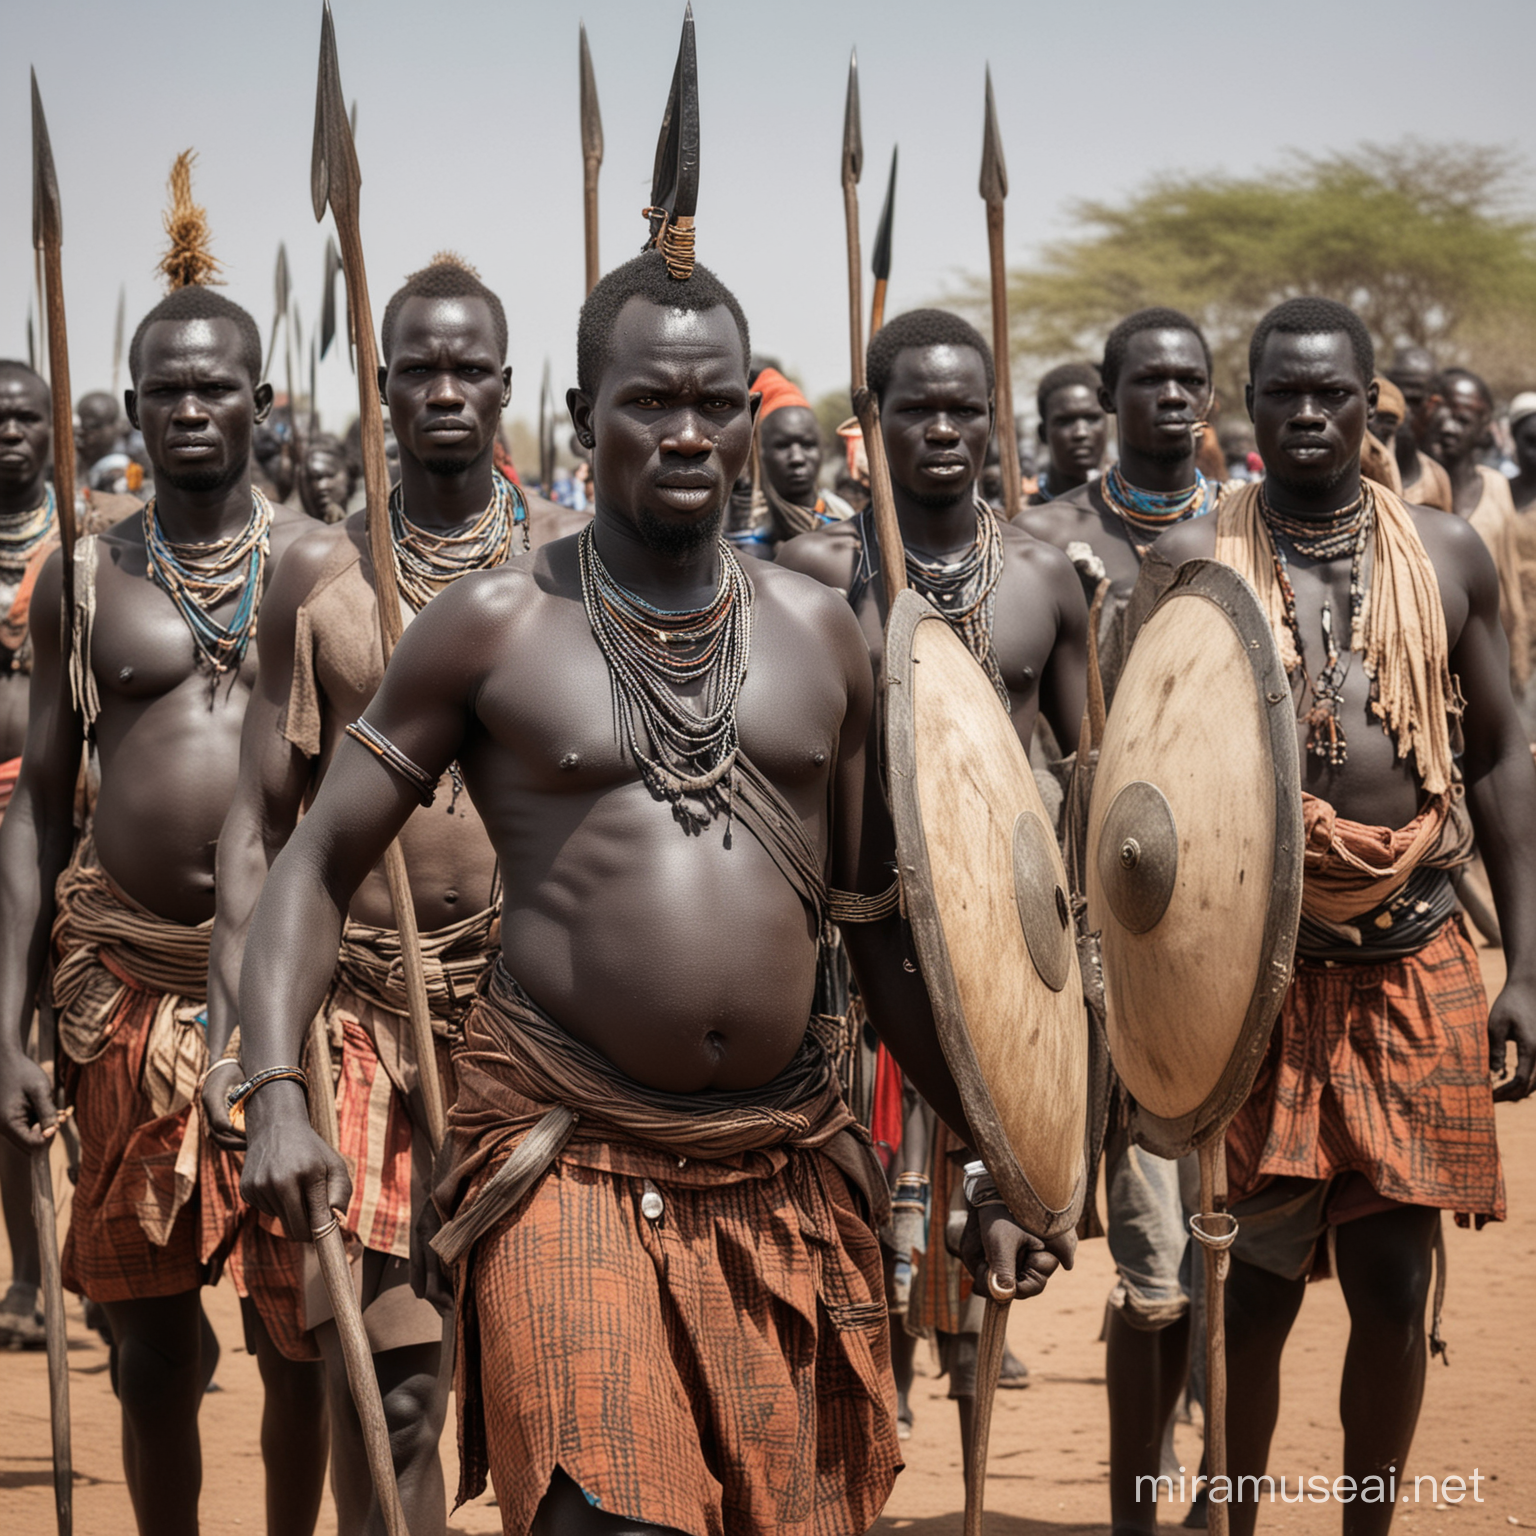 very fat South Sudanese warriors muscular with spears and shields